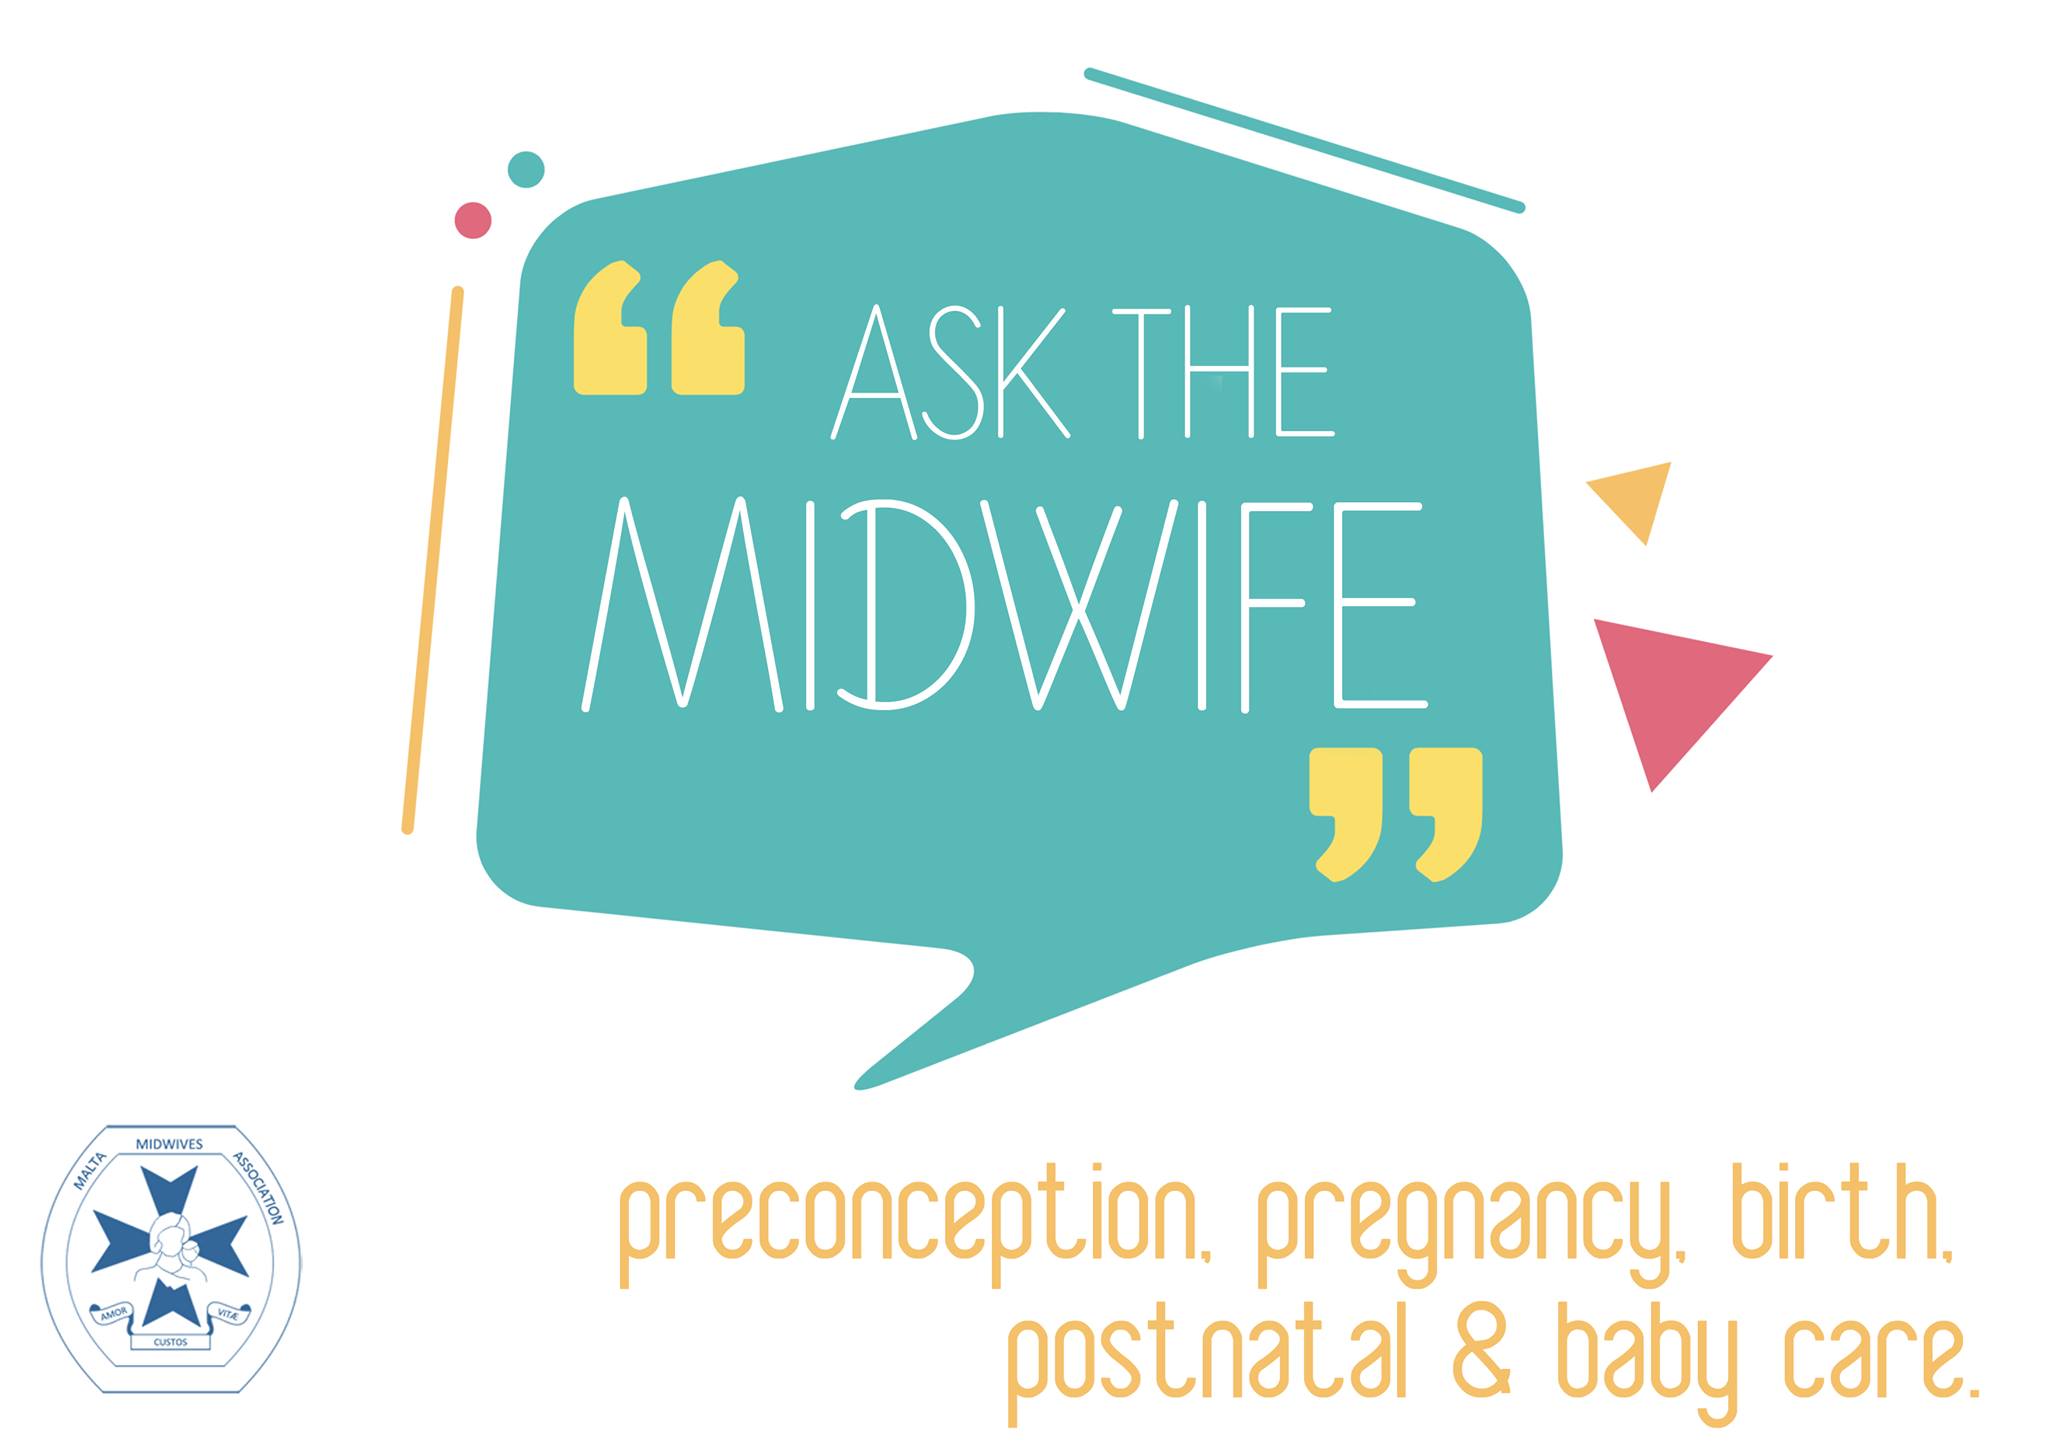 Ask the midwife